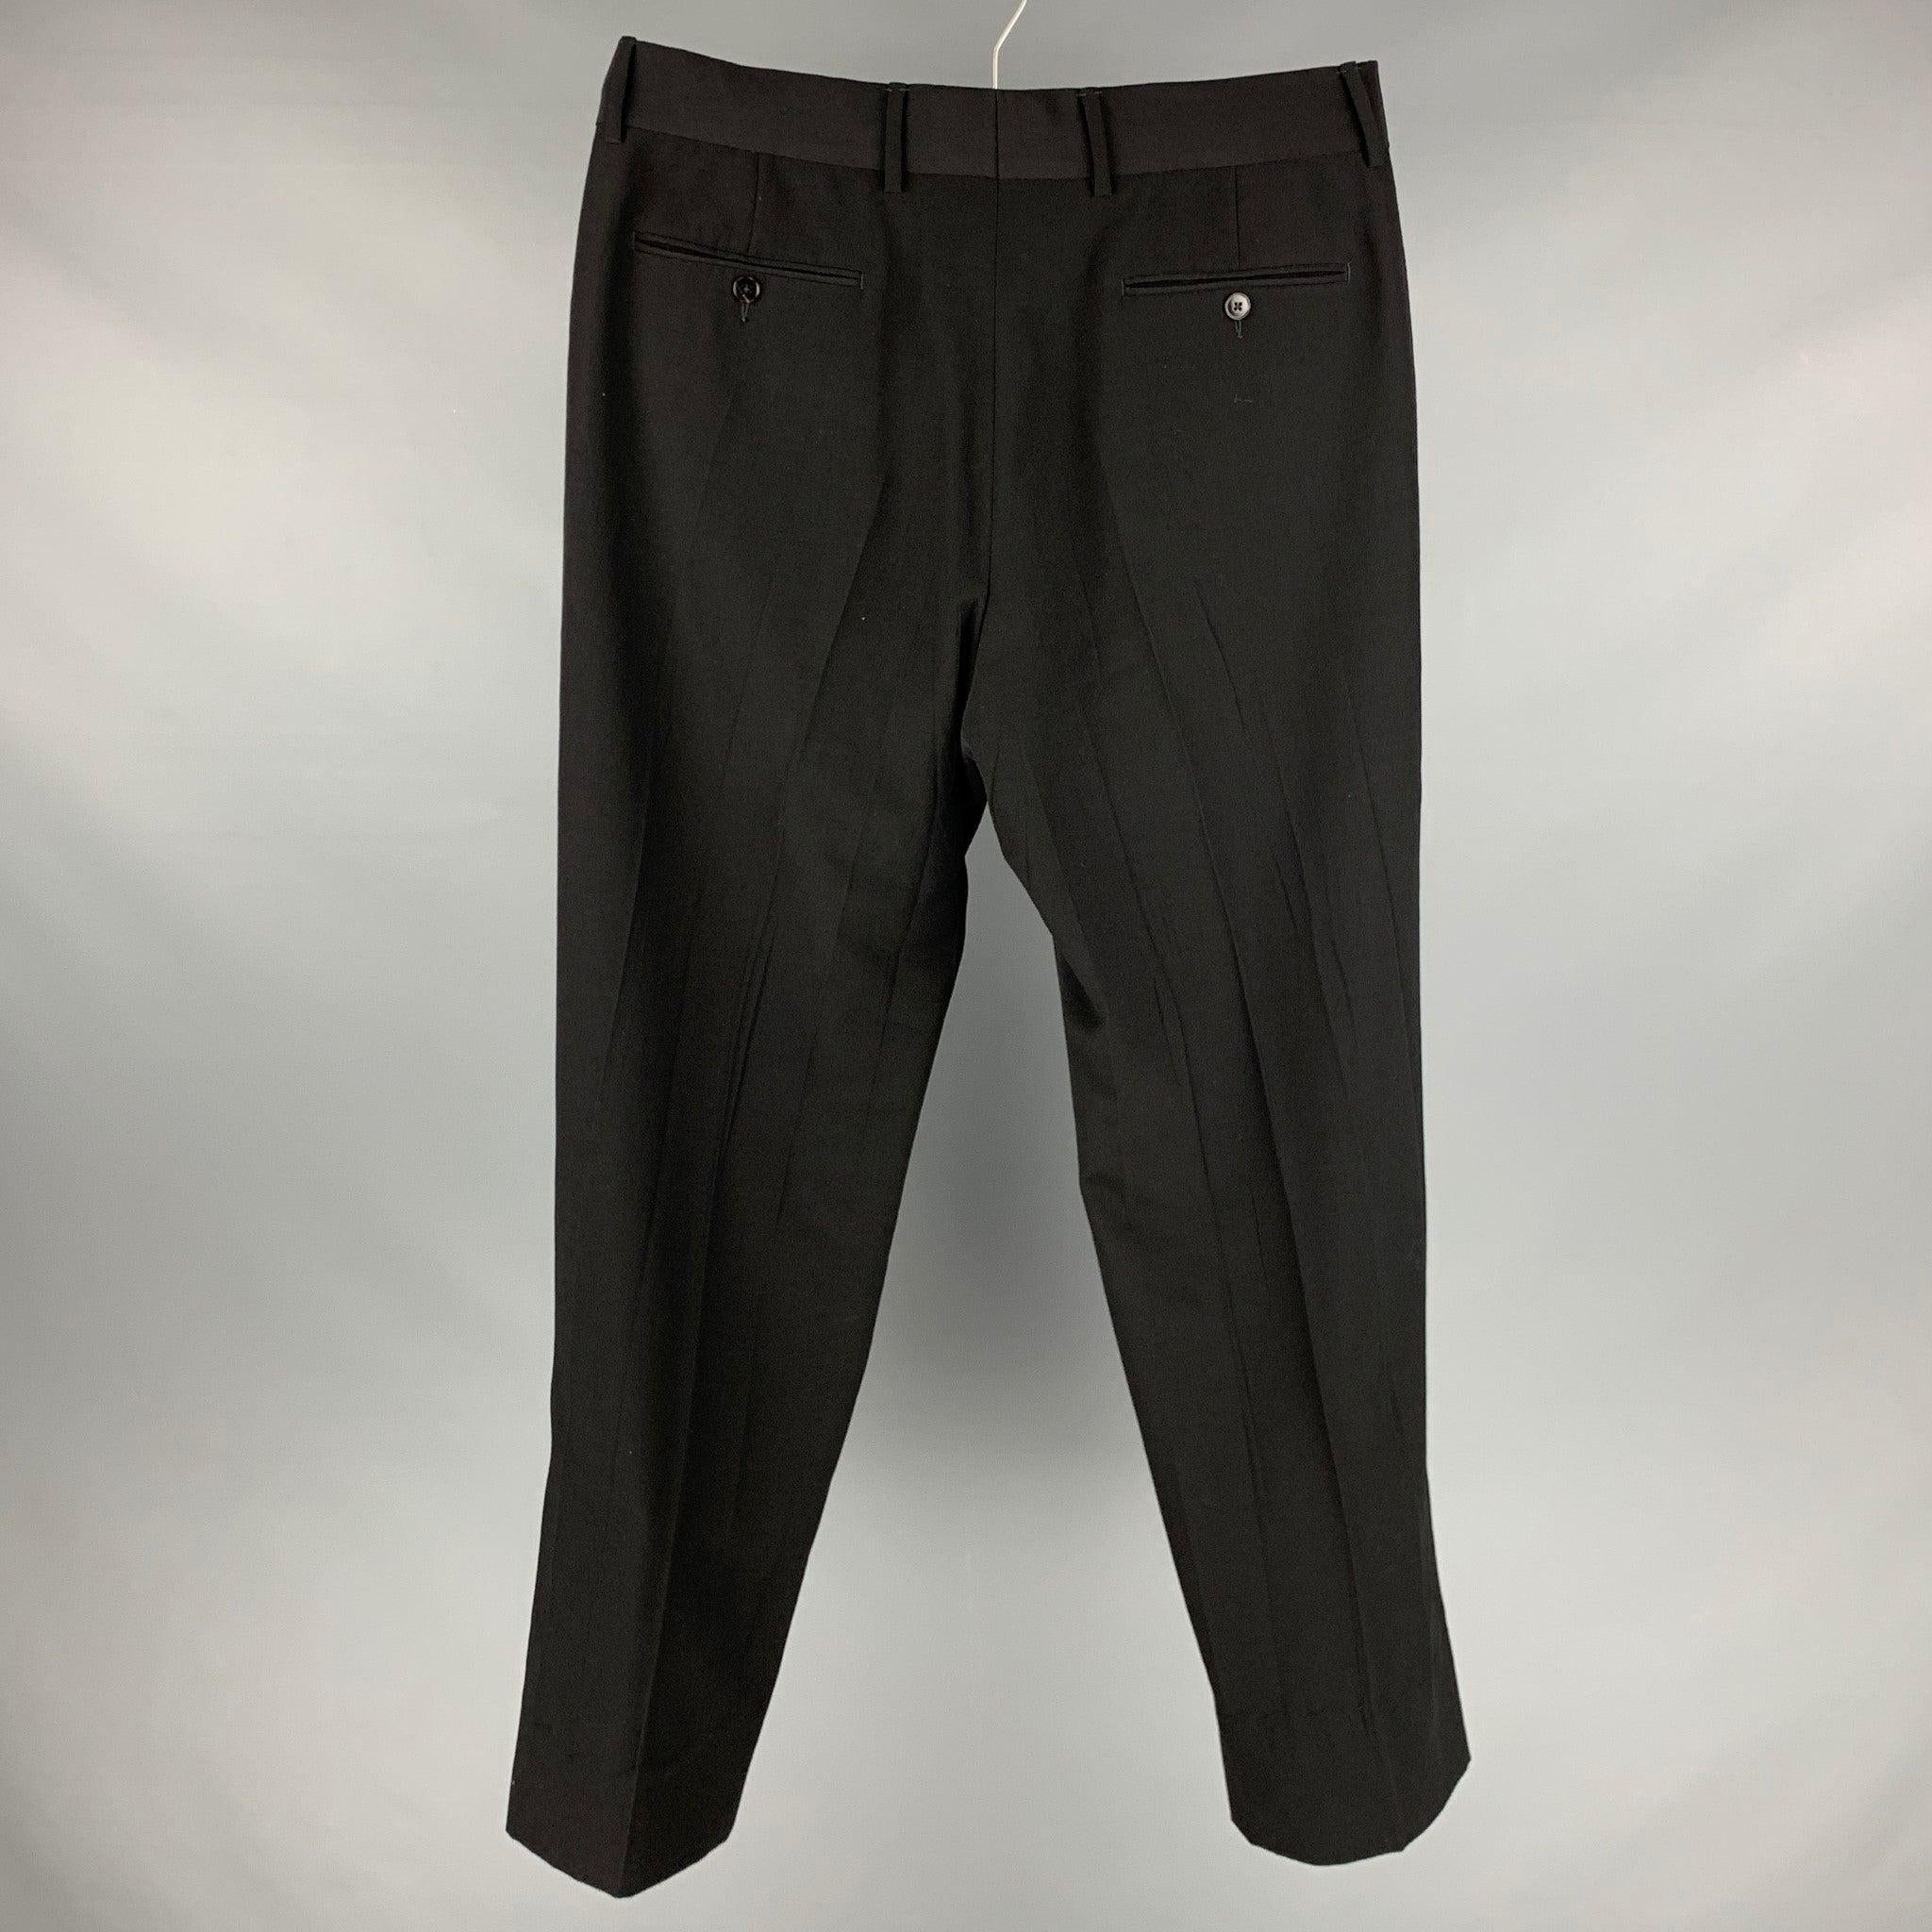 GUCCI dress pants in a black wool featuring a flat front style, exposed hem, and a zipper fly closure. Made in Switzerland.Very Good Pre-Owned Condition. Minor signs of wear. 

Marked:  7-50R 

Measurements: 
 Waist: 34 inches Rise: 11.5 inches